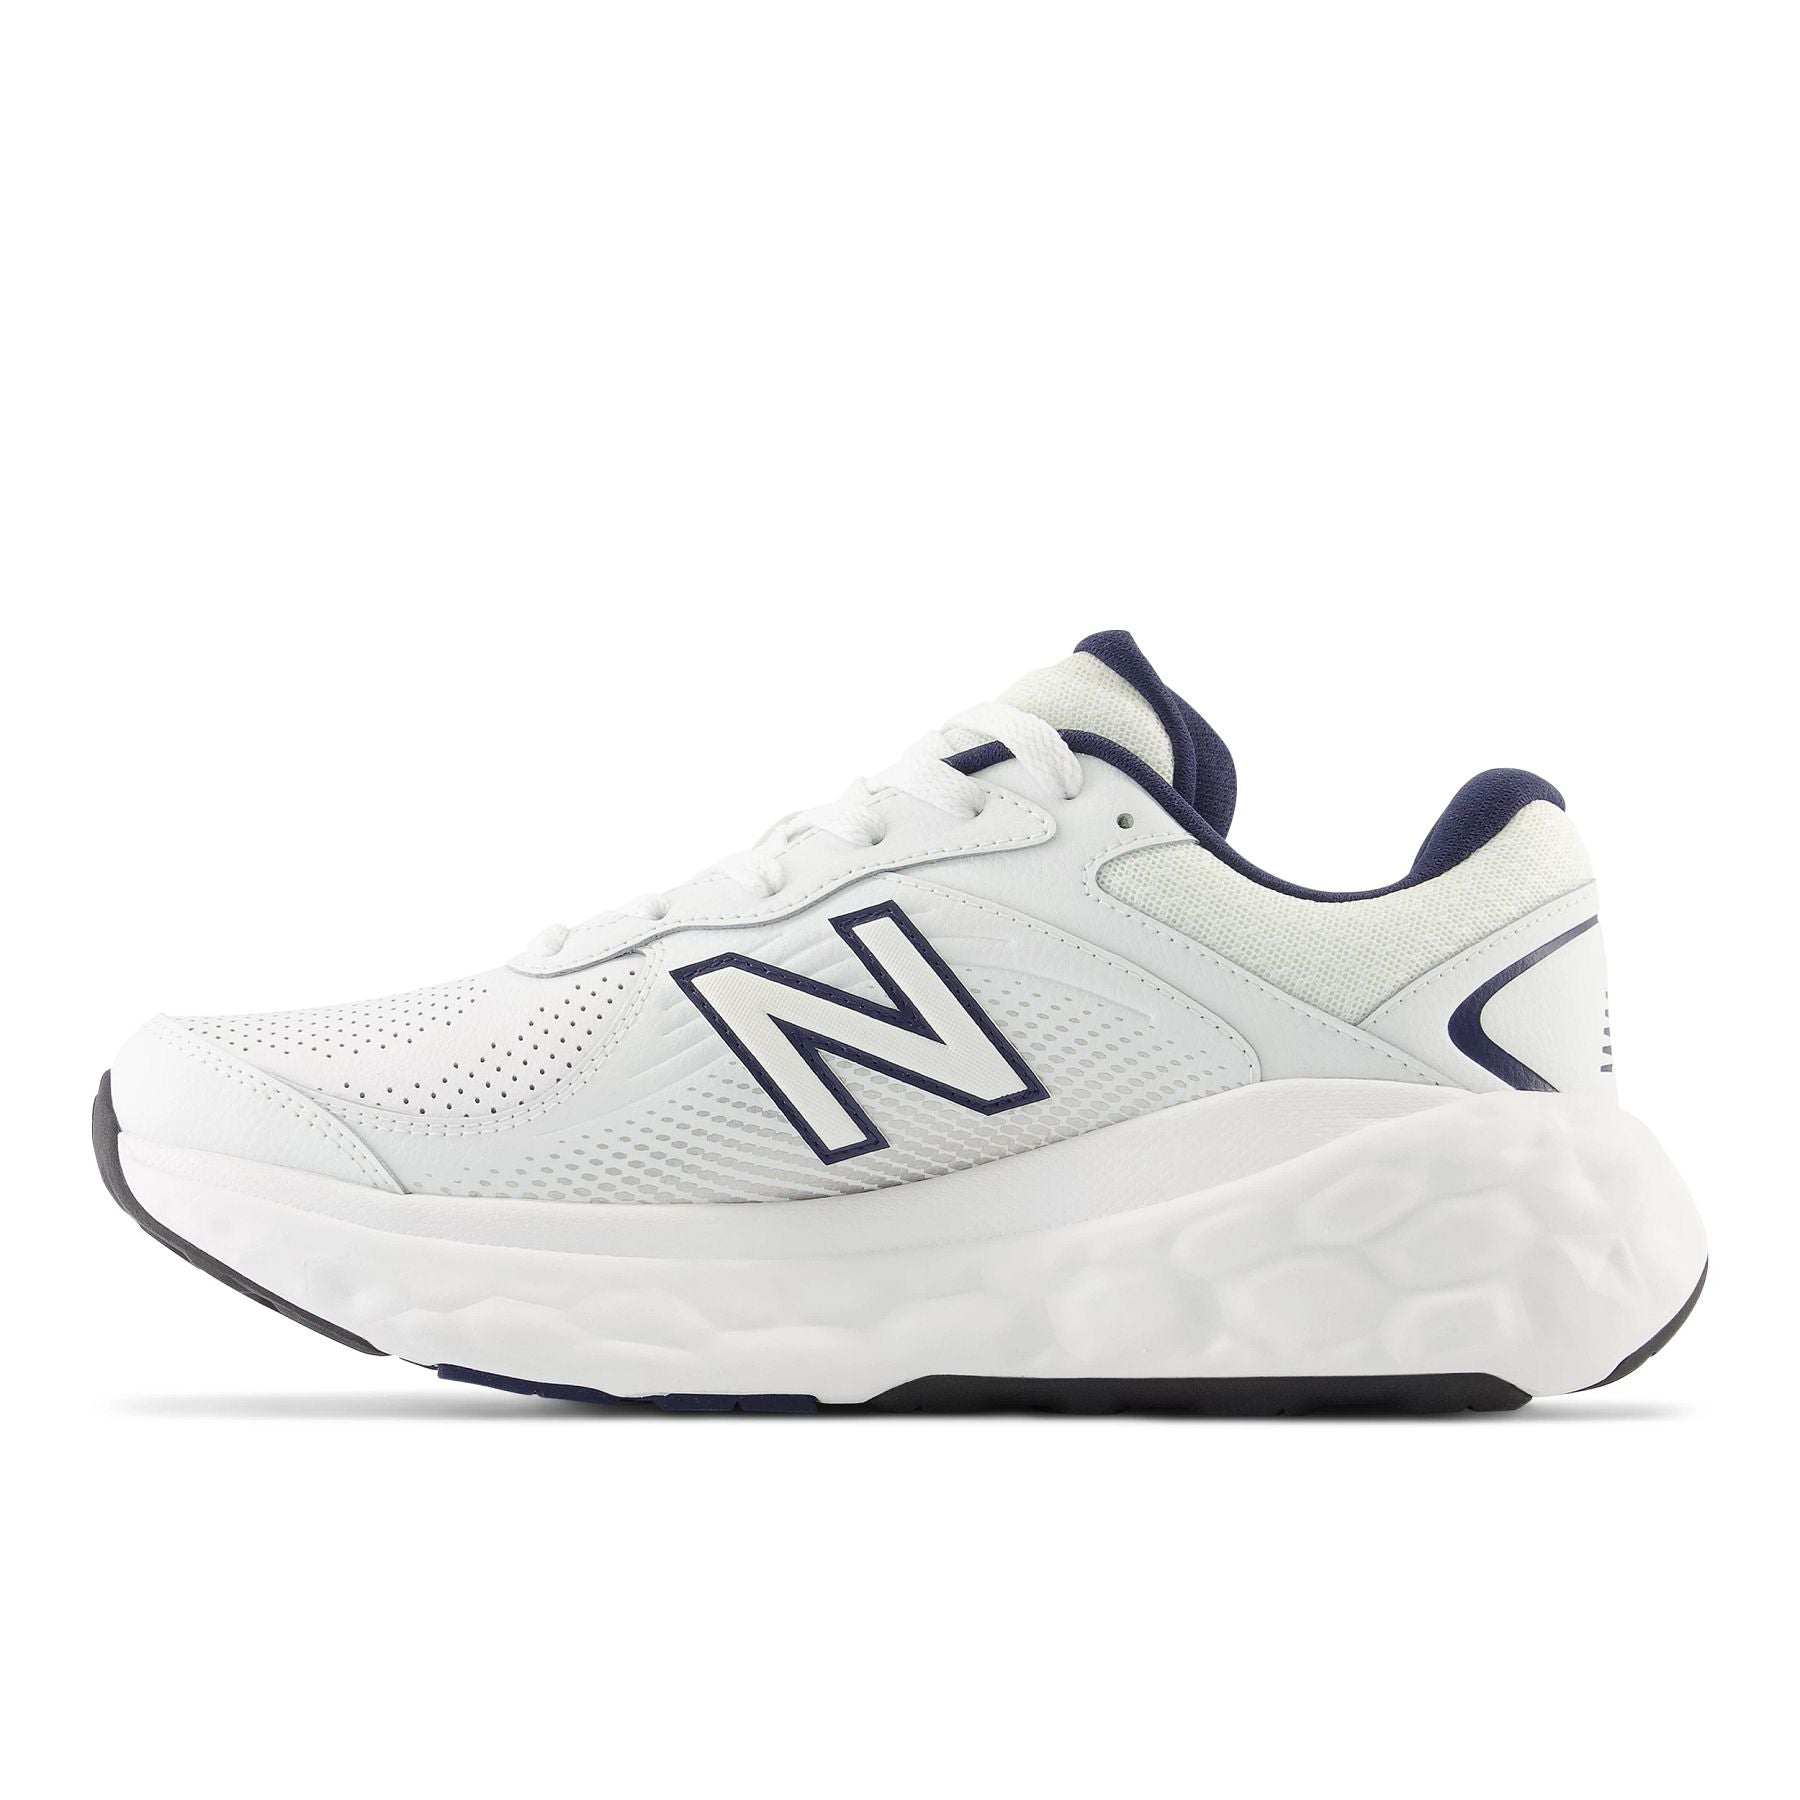 Medial view of the Men's Leather New Balance MW840 V1 in White/Navy